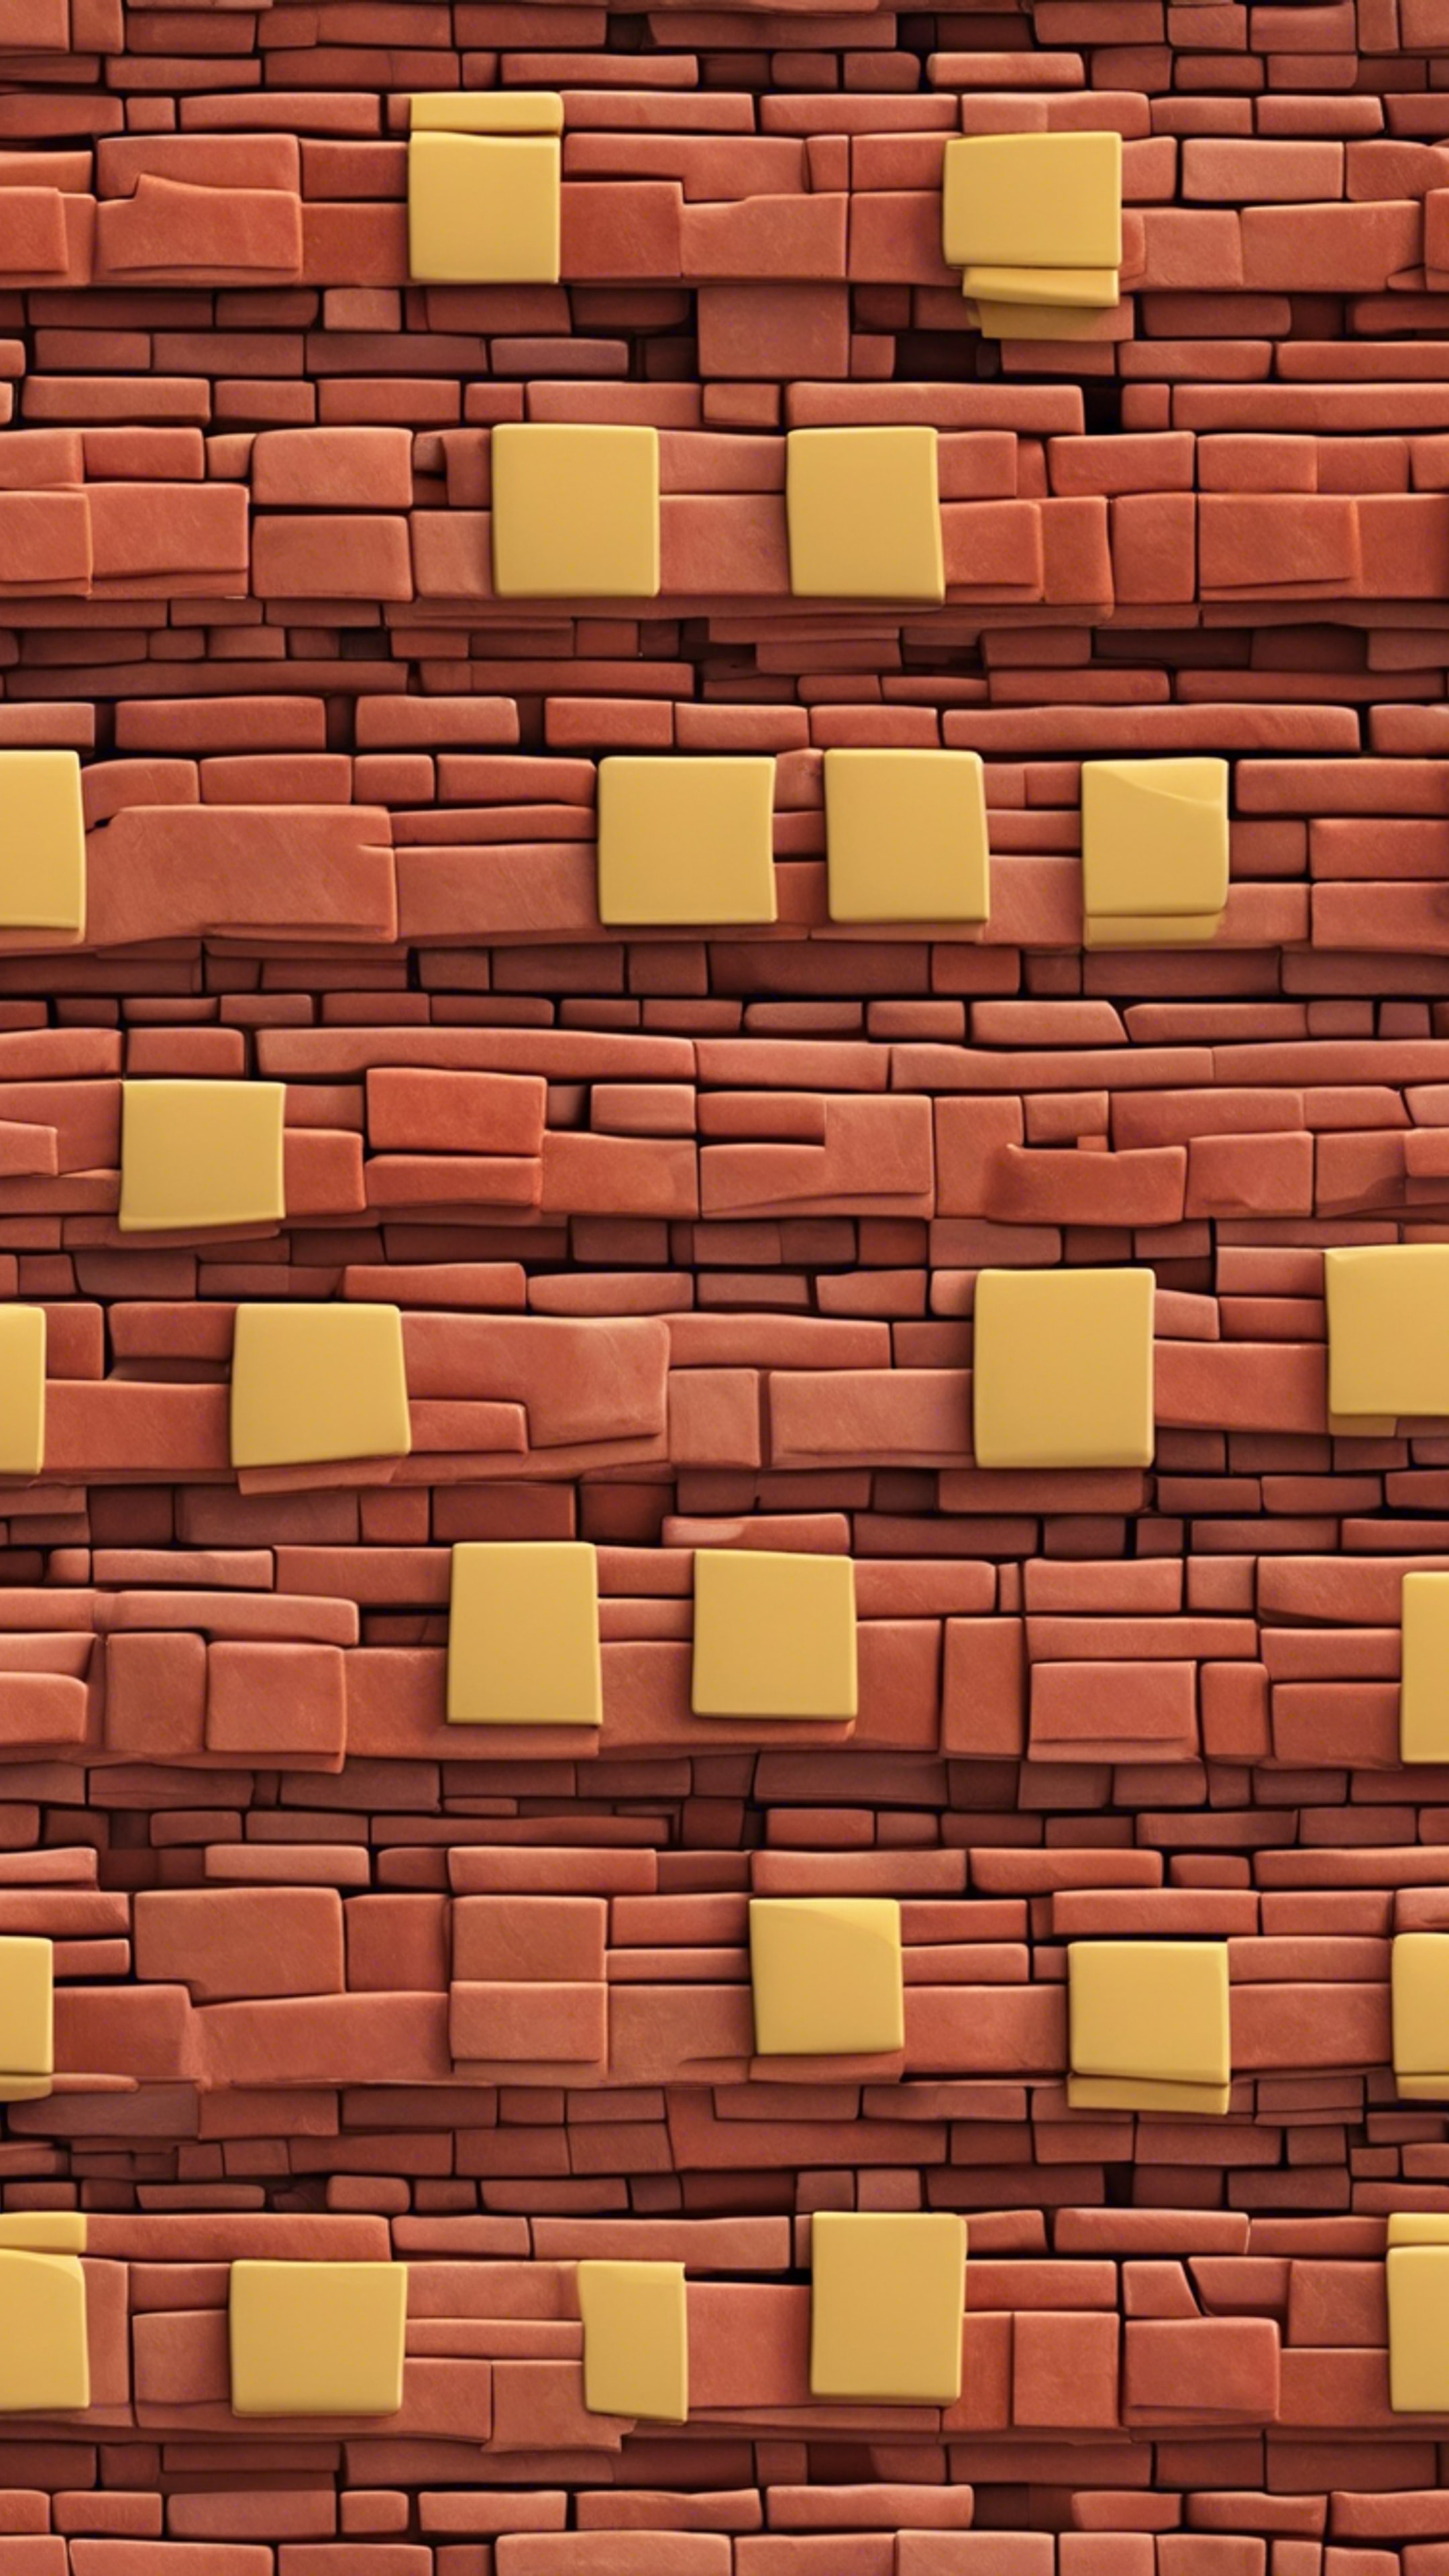 A seamless pattern of red and yellow bricks arranged in an interlocking zigzag.壁紙[44455a9799a64fc6ae31]